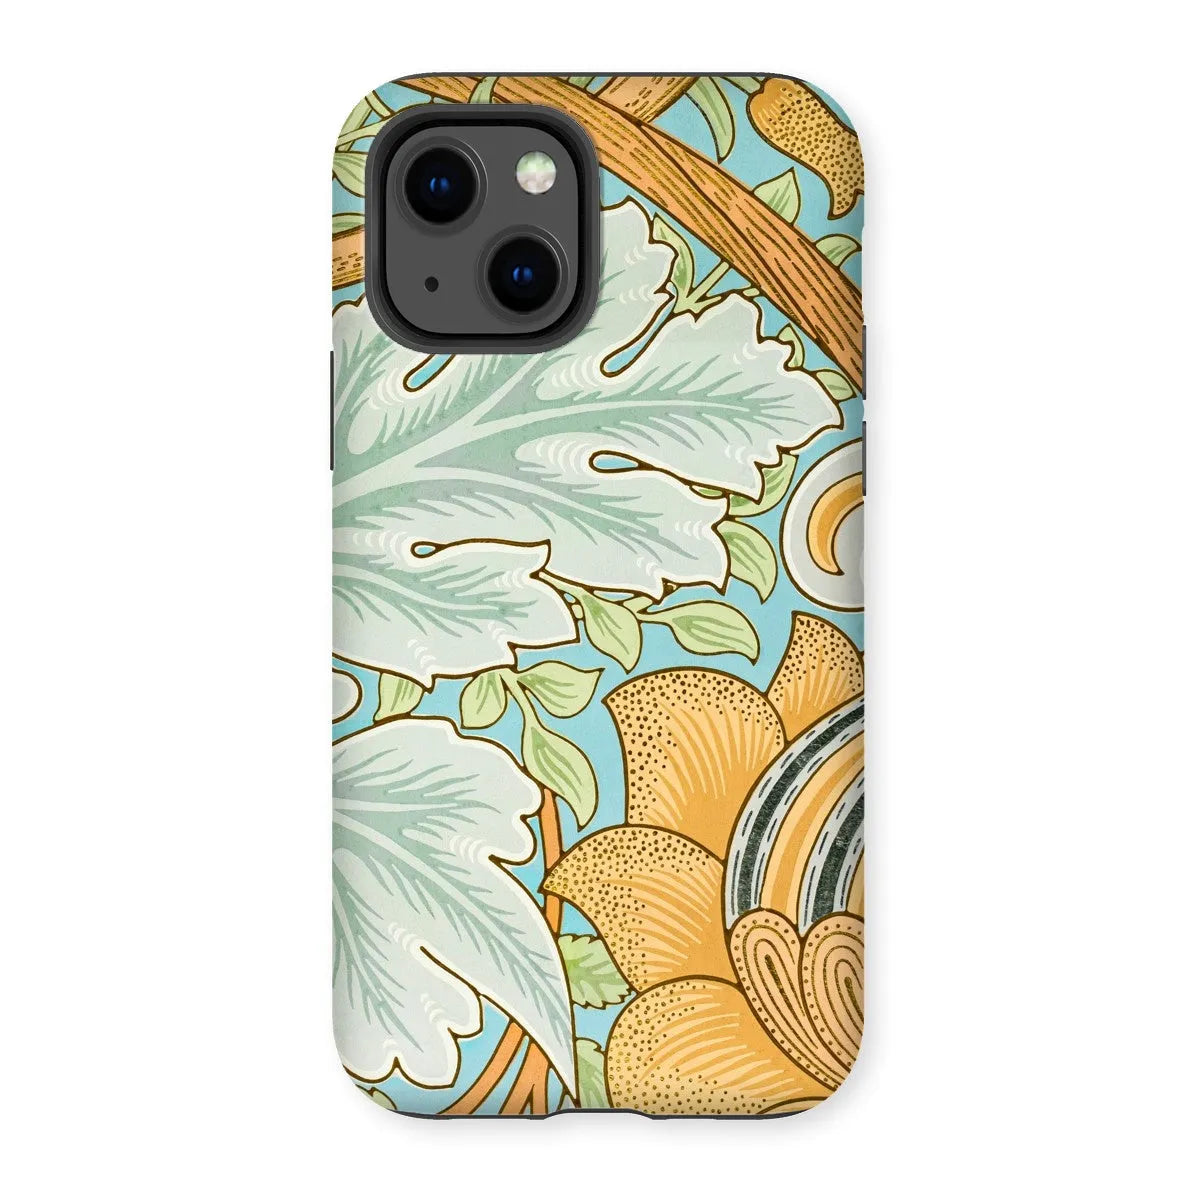 St. James - Arts And Crafts Phone Case - William Morris - Iphone 13 / Matte - Mobile Phone Cases - Aesthetic Art